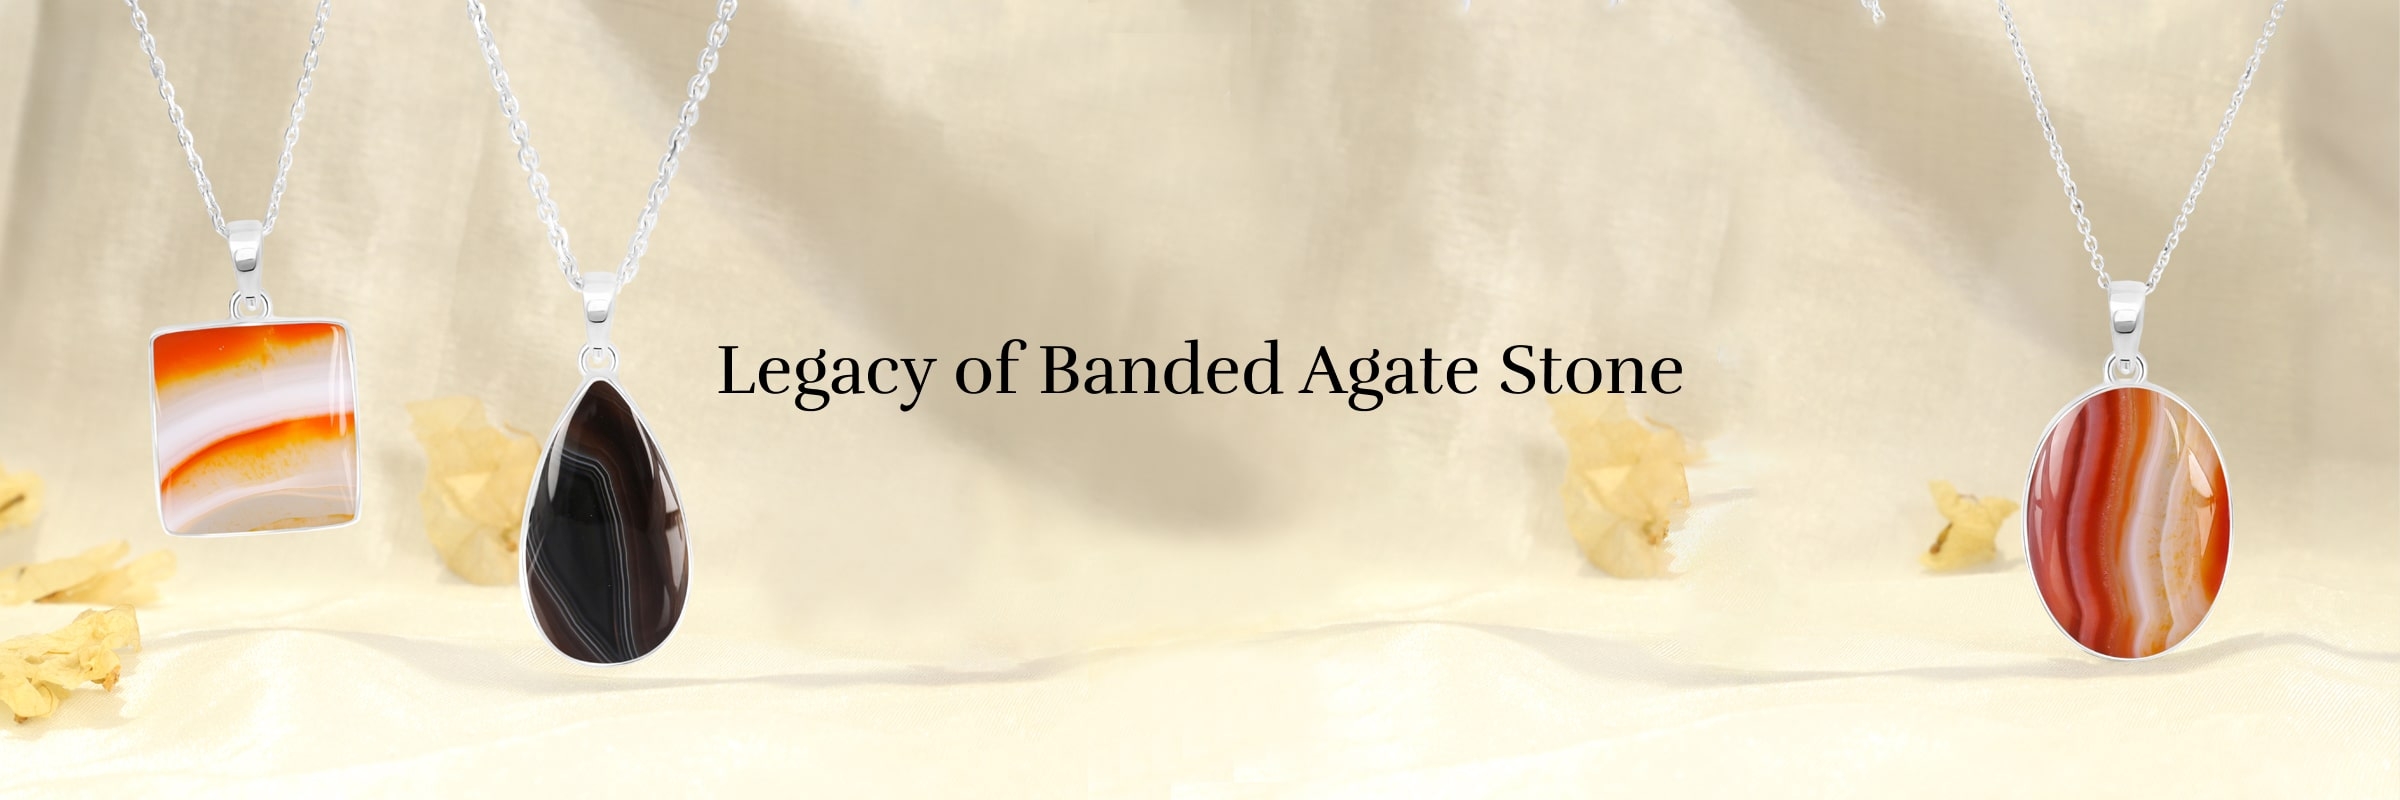 History of Banded Agate Stone